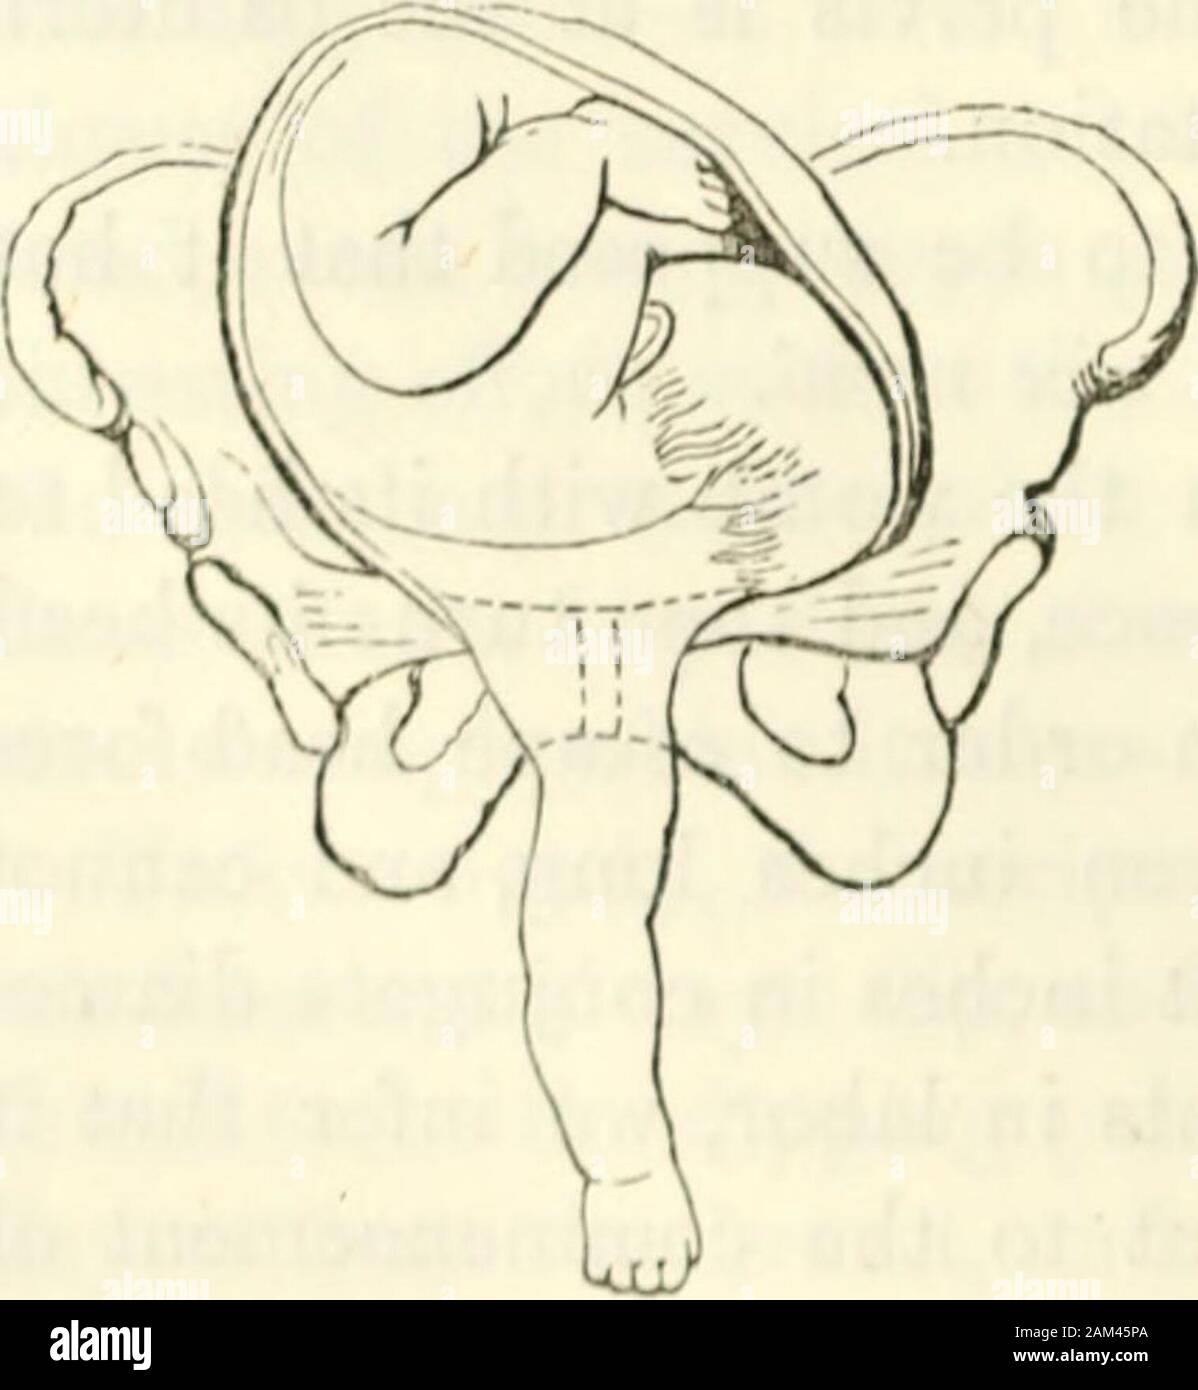 Obstetrics : the science and the art . nal point is the sacrum of the foetus. For the shoulder presentation,the cardinal point is the whole head of the child. As to the head presentation—it may deviate, and allow a shoulderto come to the os uteri: but this is a mere accident of a cephalic pre-sentation : an accident that has arisen from the impinging of the headupon the margin or brim of the pelvis, whence it has glanced upwardsto the iliac fossa, permitting the shoulder to take its place. This is to be seen by inspecting the cut, in whichthe childs head, which originally pre-sented, has devia Stock Photo